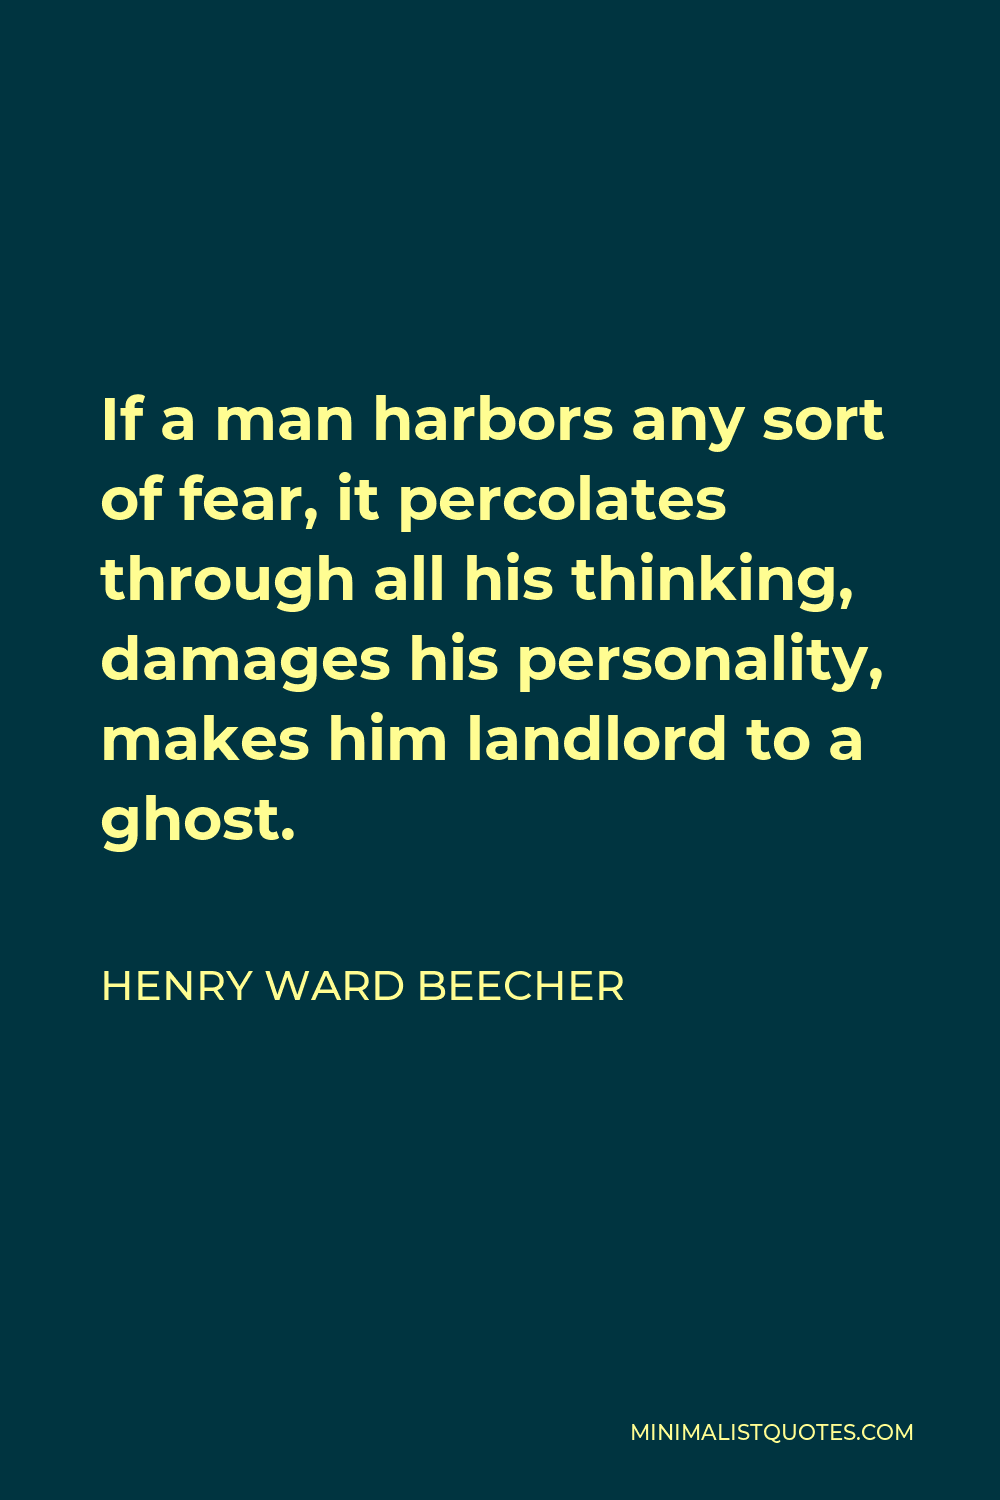 Henry Ward Beecher Quote - If a man harbors any sort of fear, it percolates through all his thinking, damages his personality, makes him landlord to a ghost.